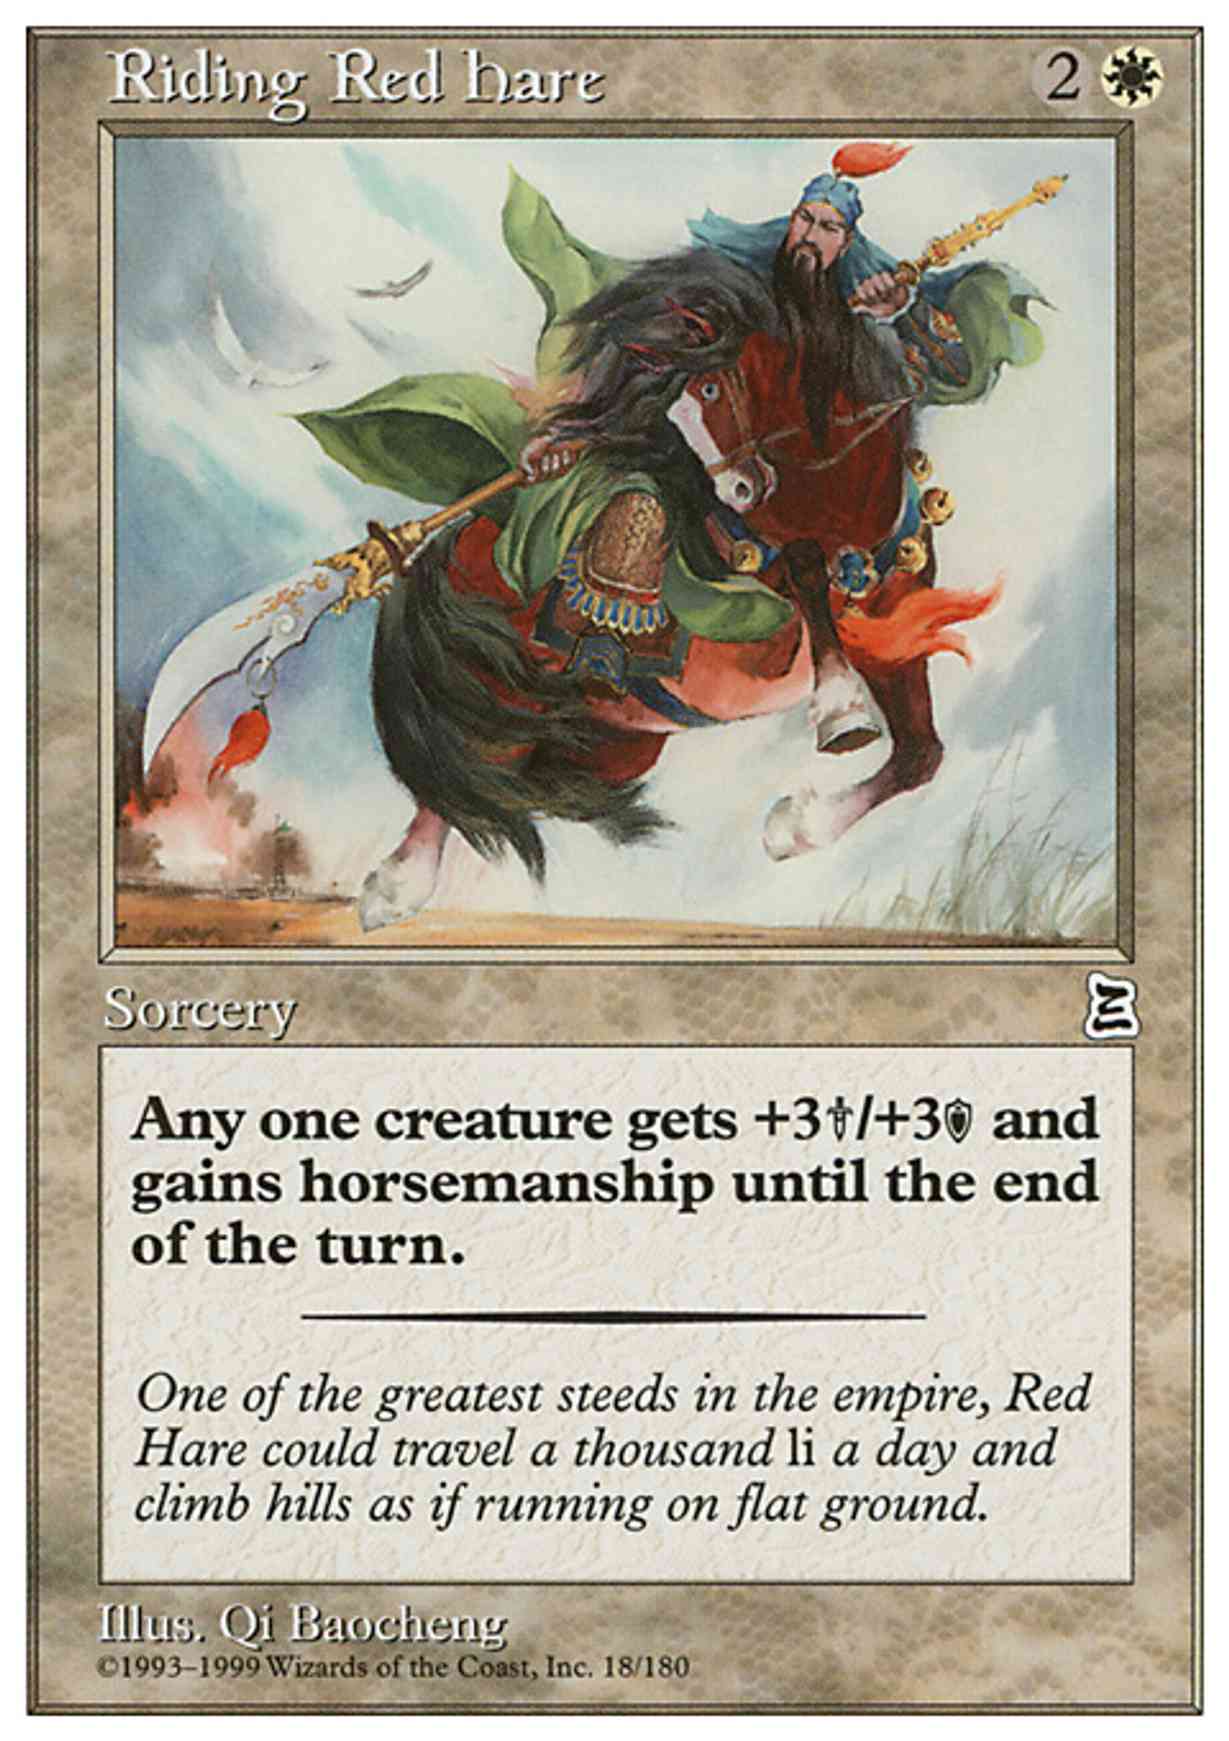 Riding Red Hare magic card front